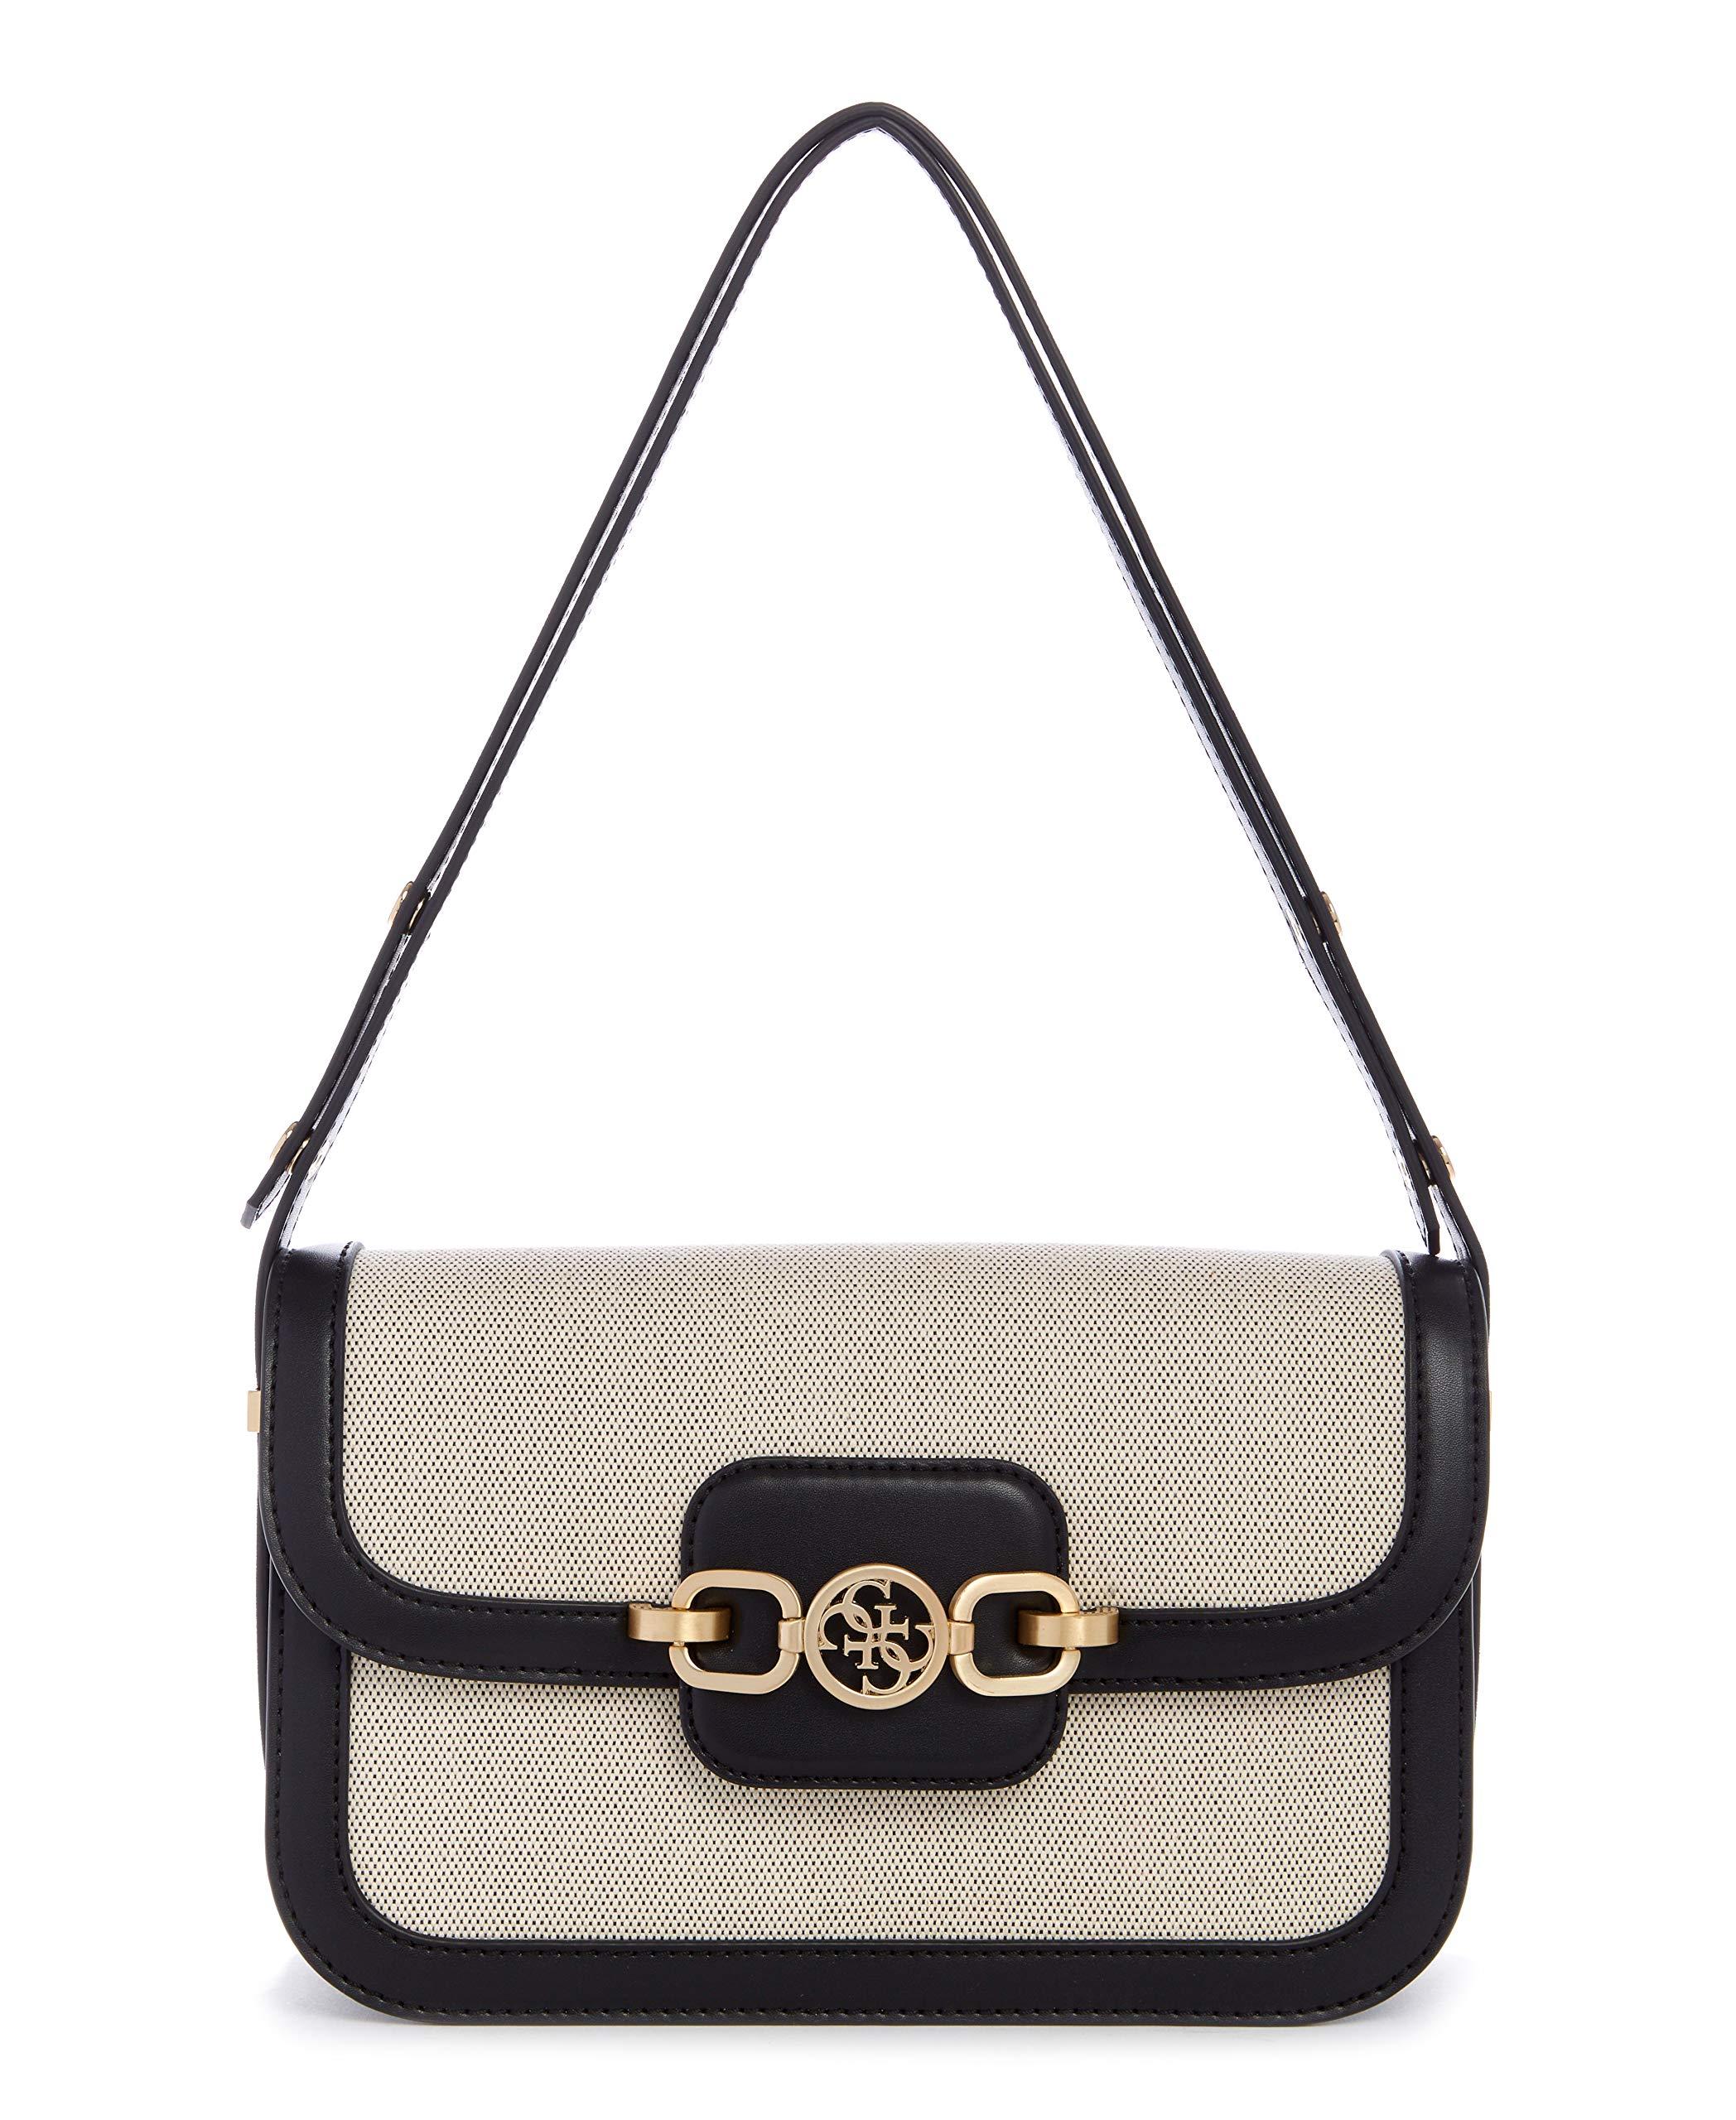 Guess Hensely Canvas Convertible Shoulder Bag in Metallic | Lyst